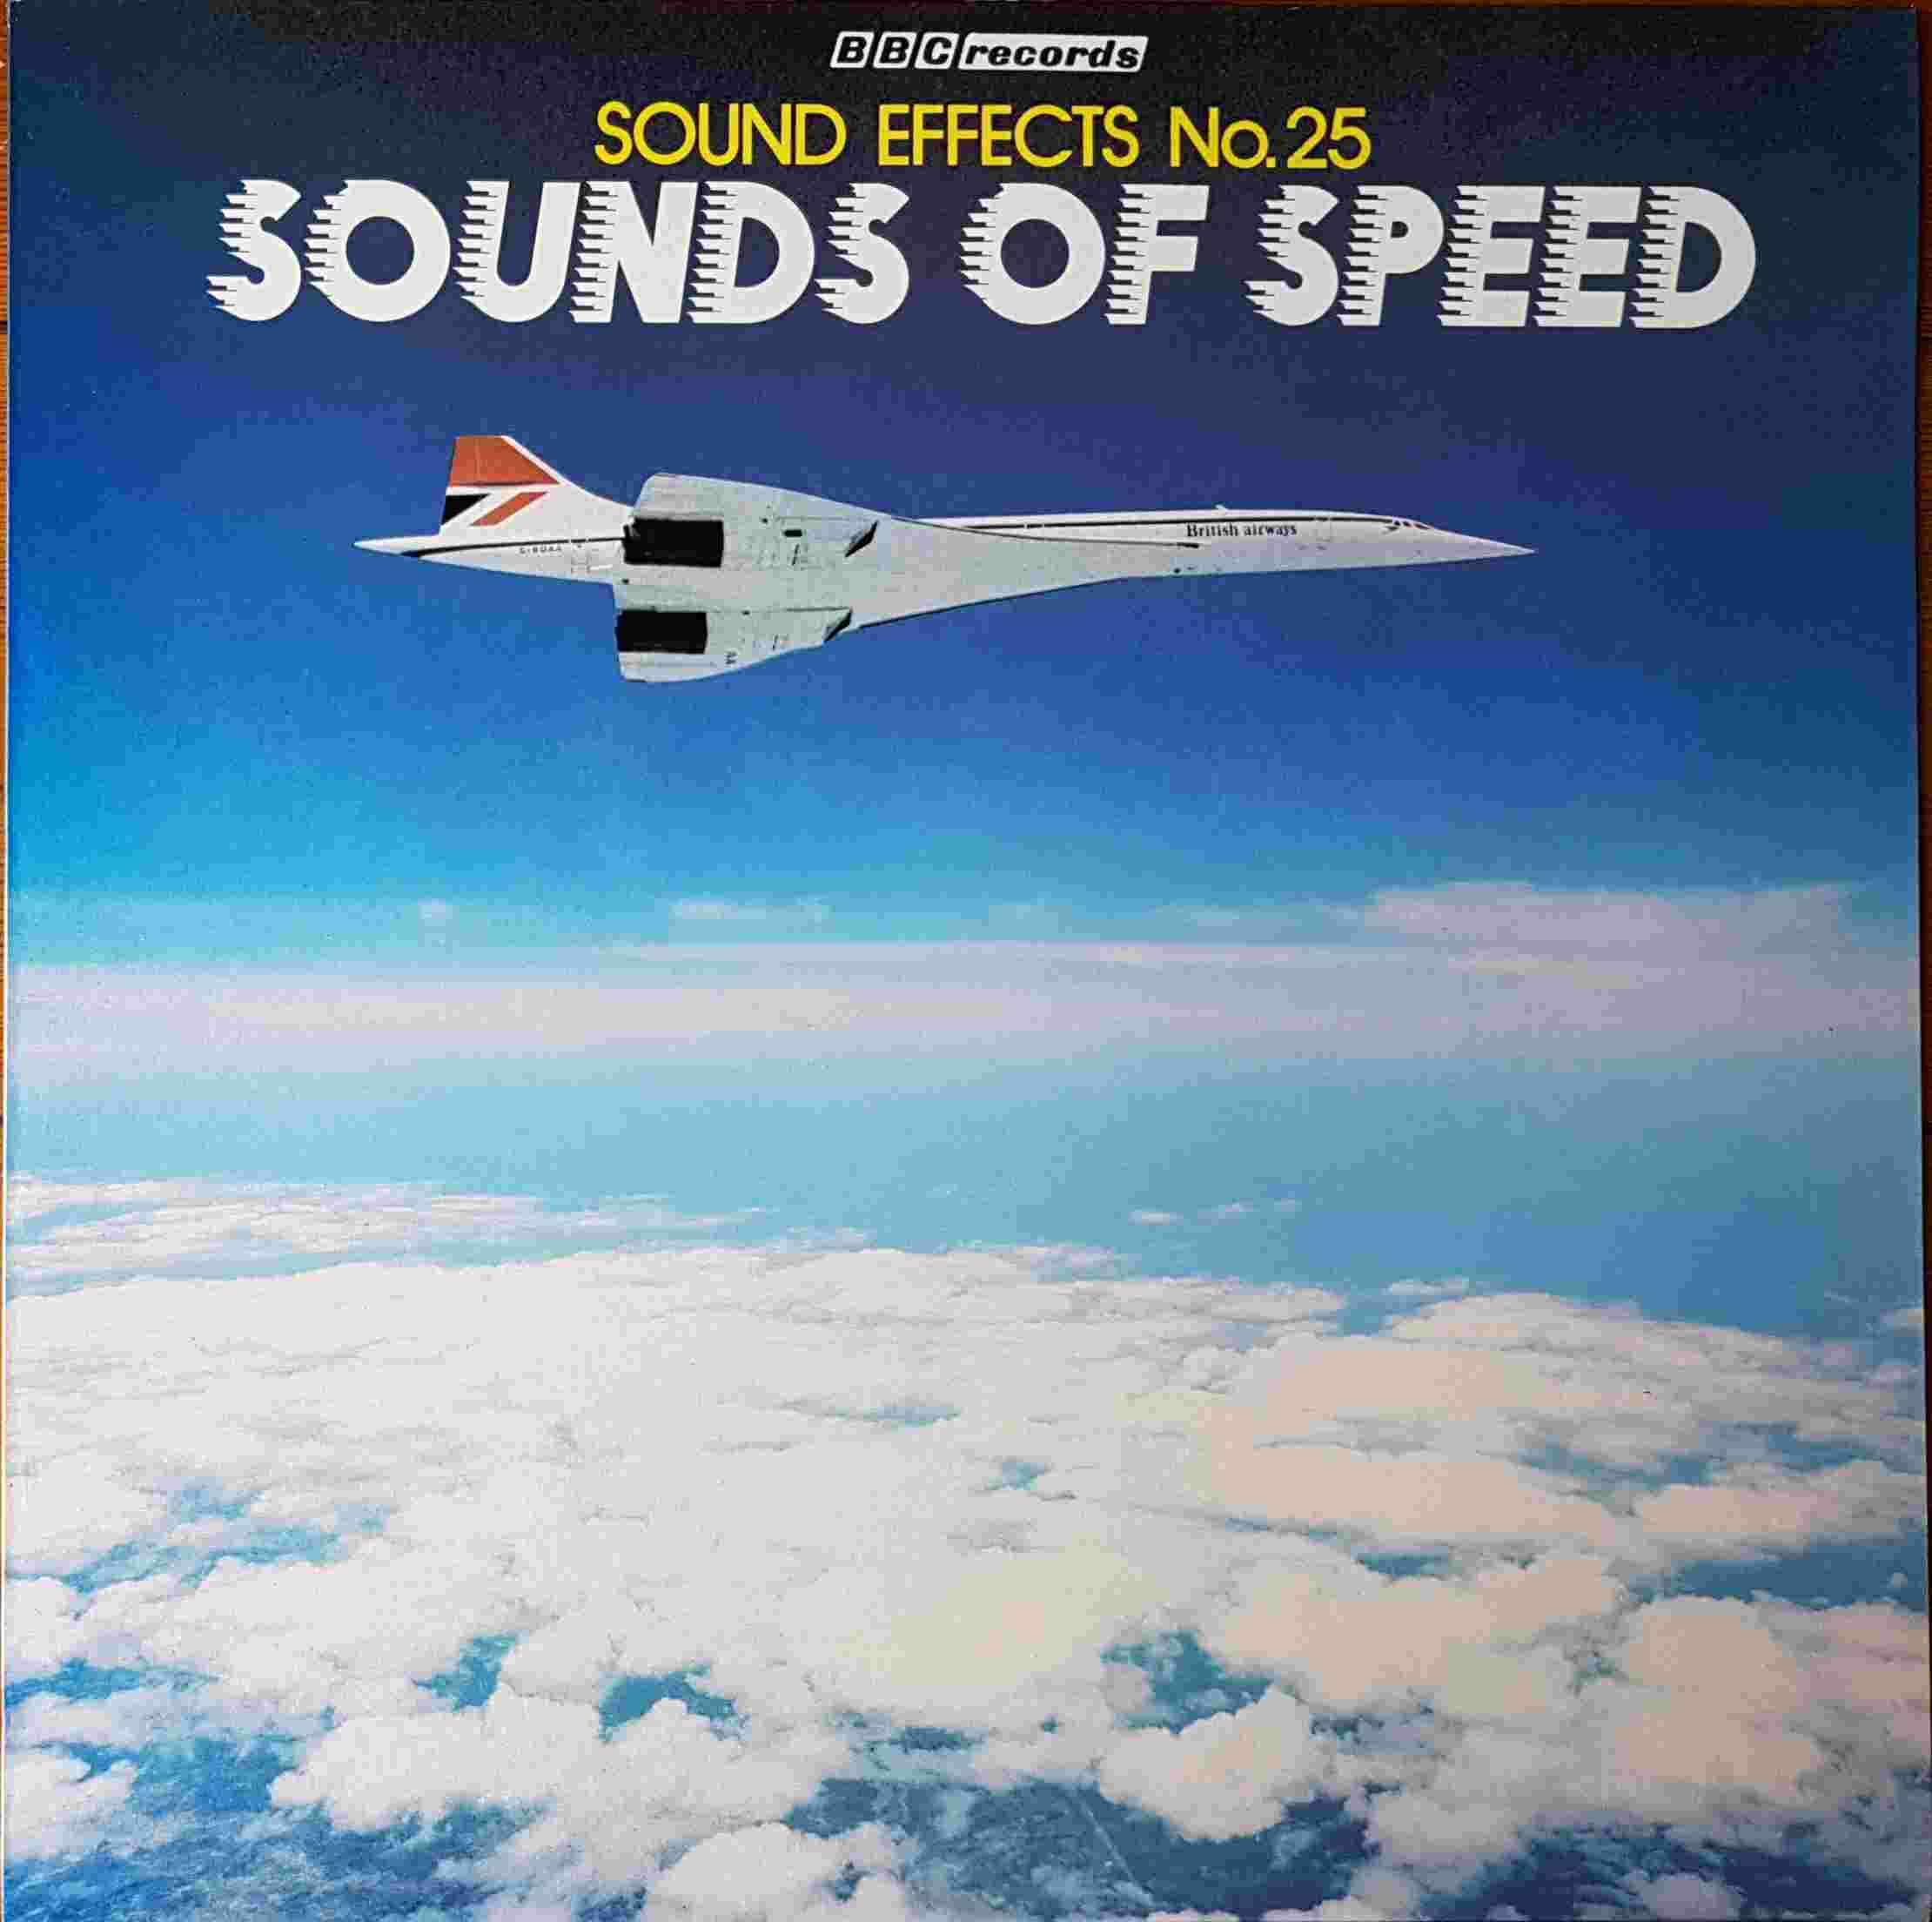 Picture of REC 390 Sounds of speed (Sound effects no. 25) by artist Various from the BBC albums - Records and Tapes library